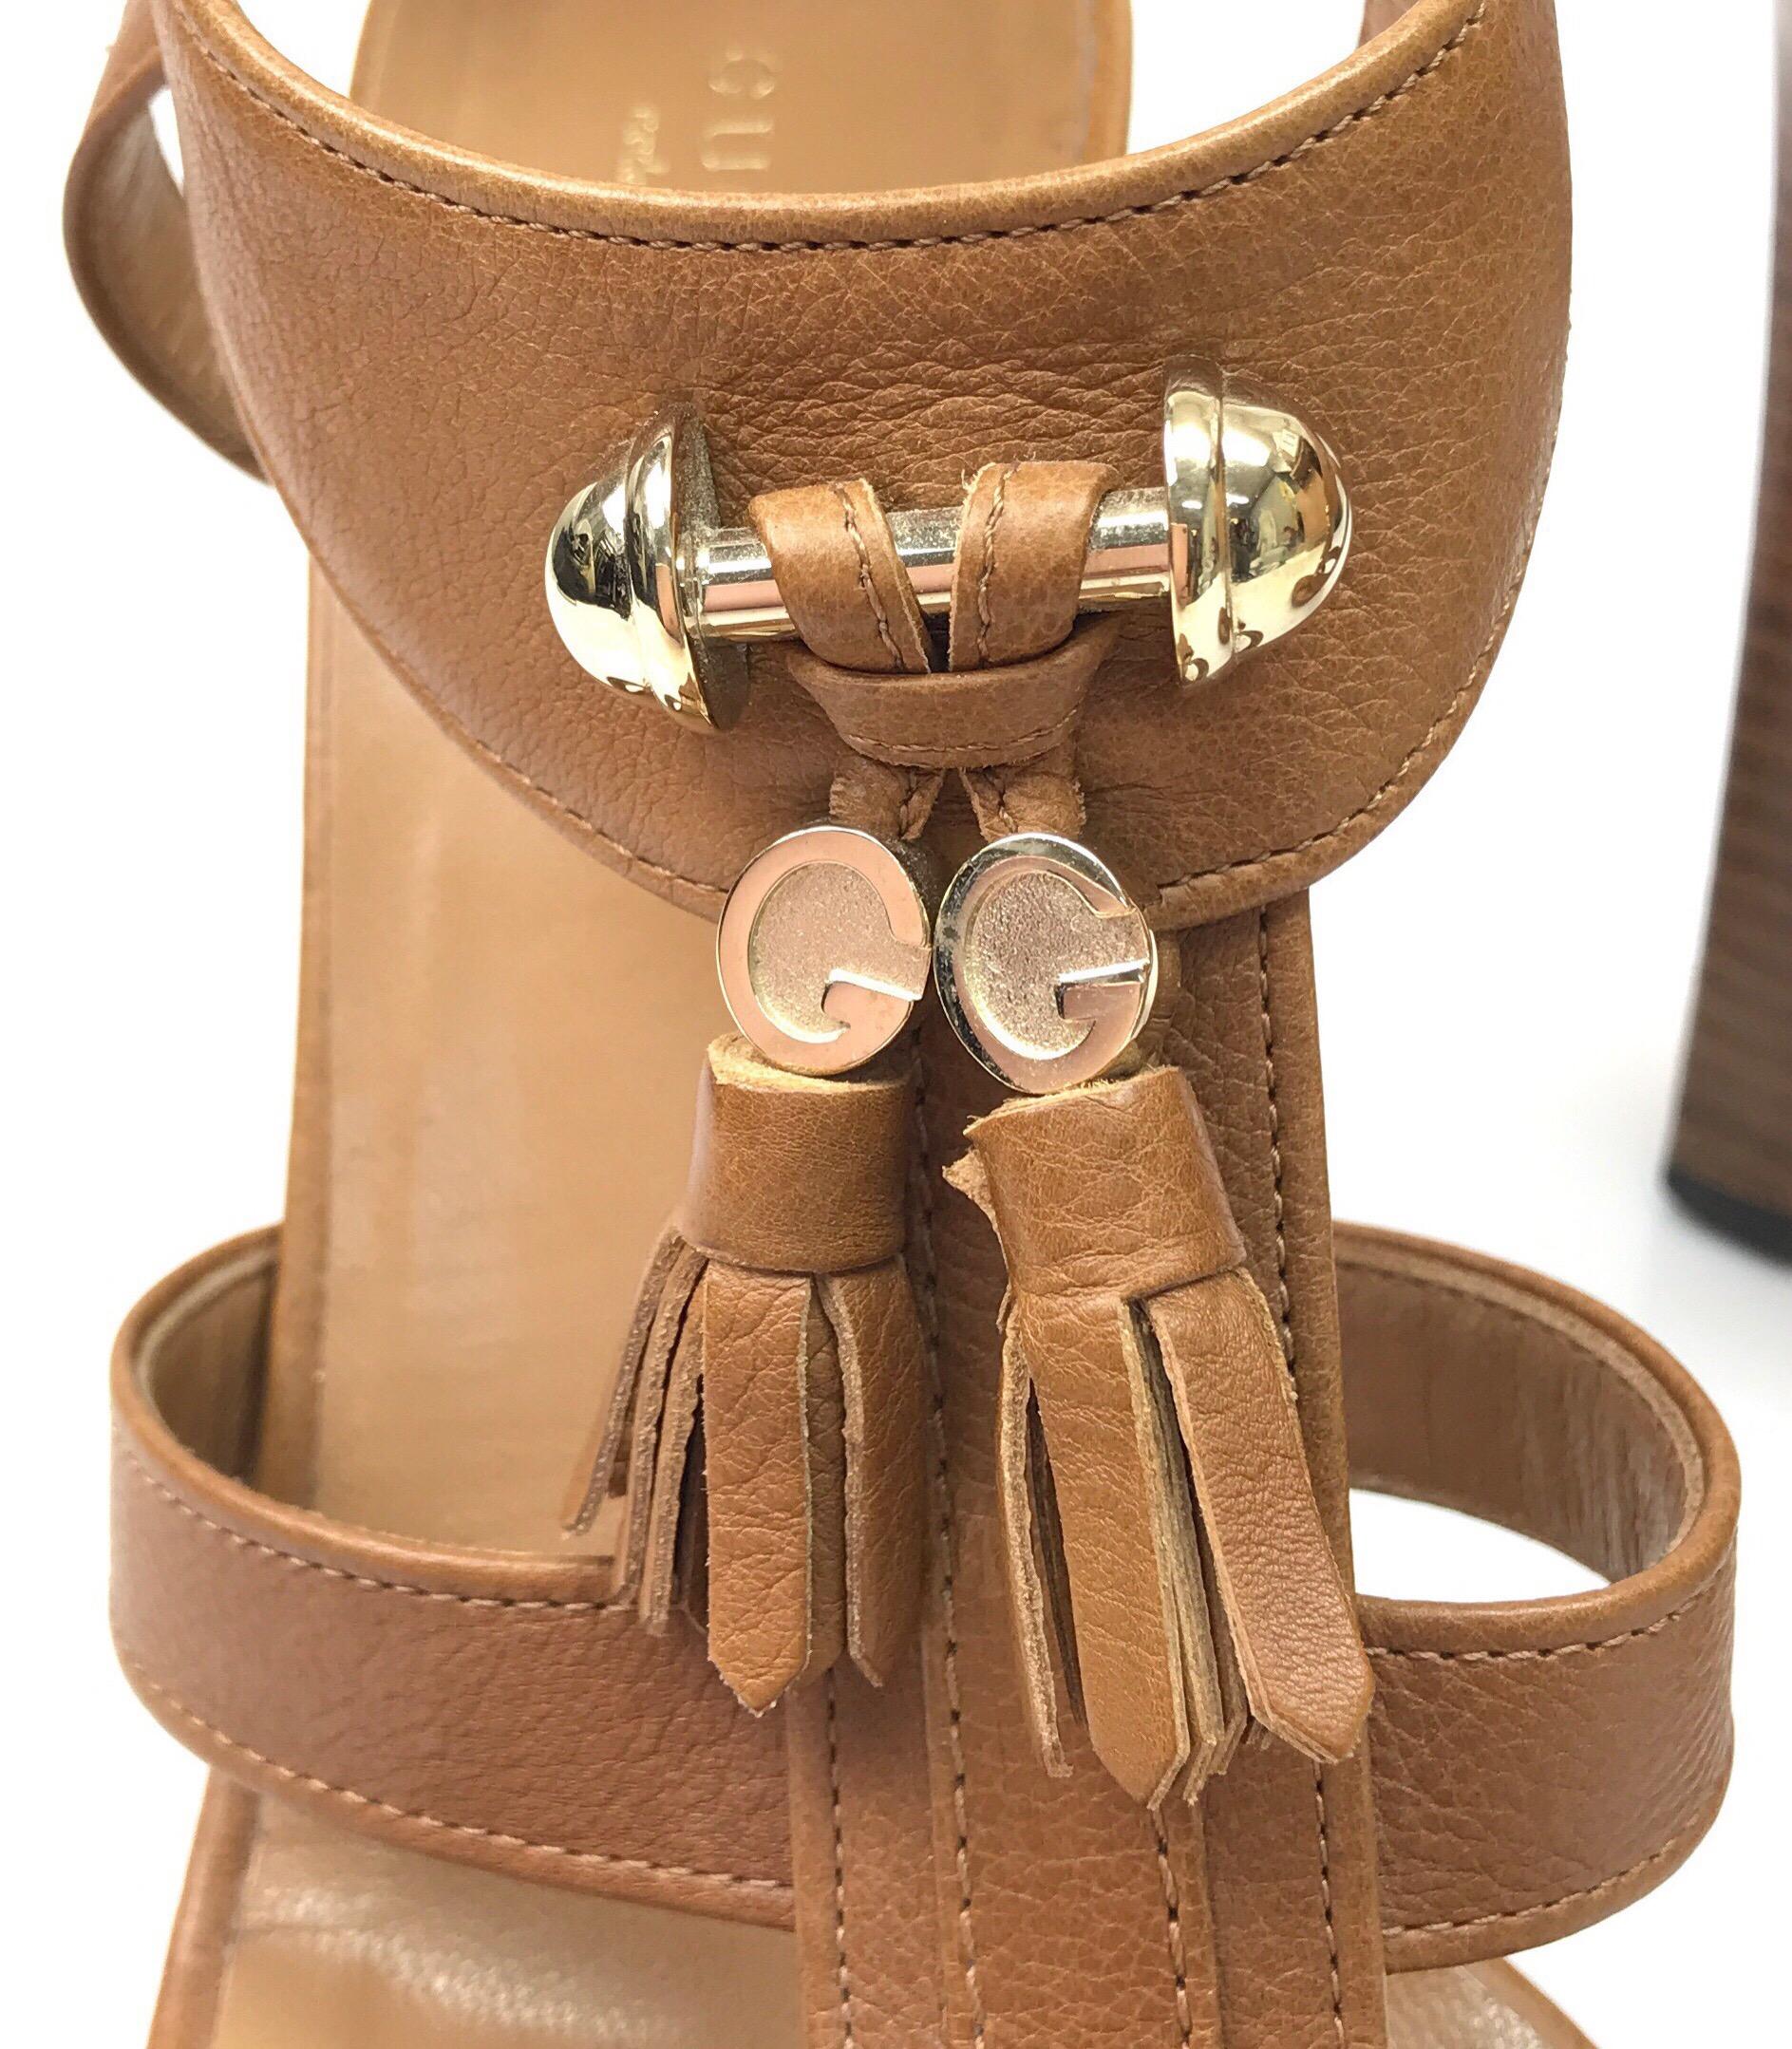 Gucci luggage T strap Wood Stack Heel w/ front tassel-38 In Good Condition For Sale In West Palm Beach, FL